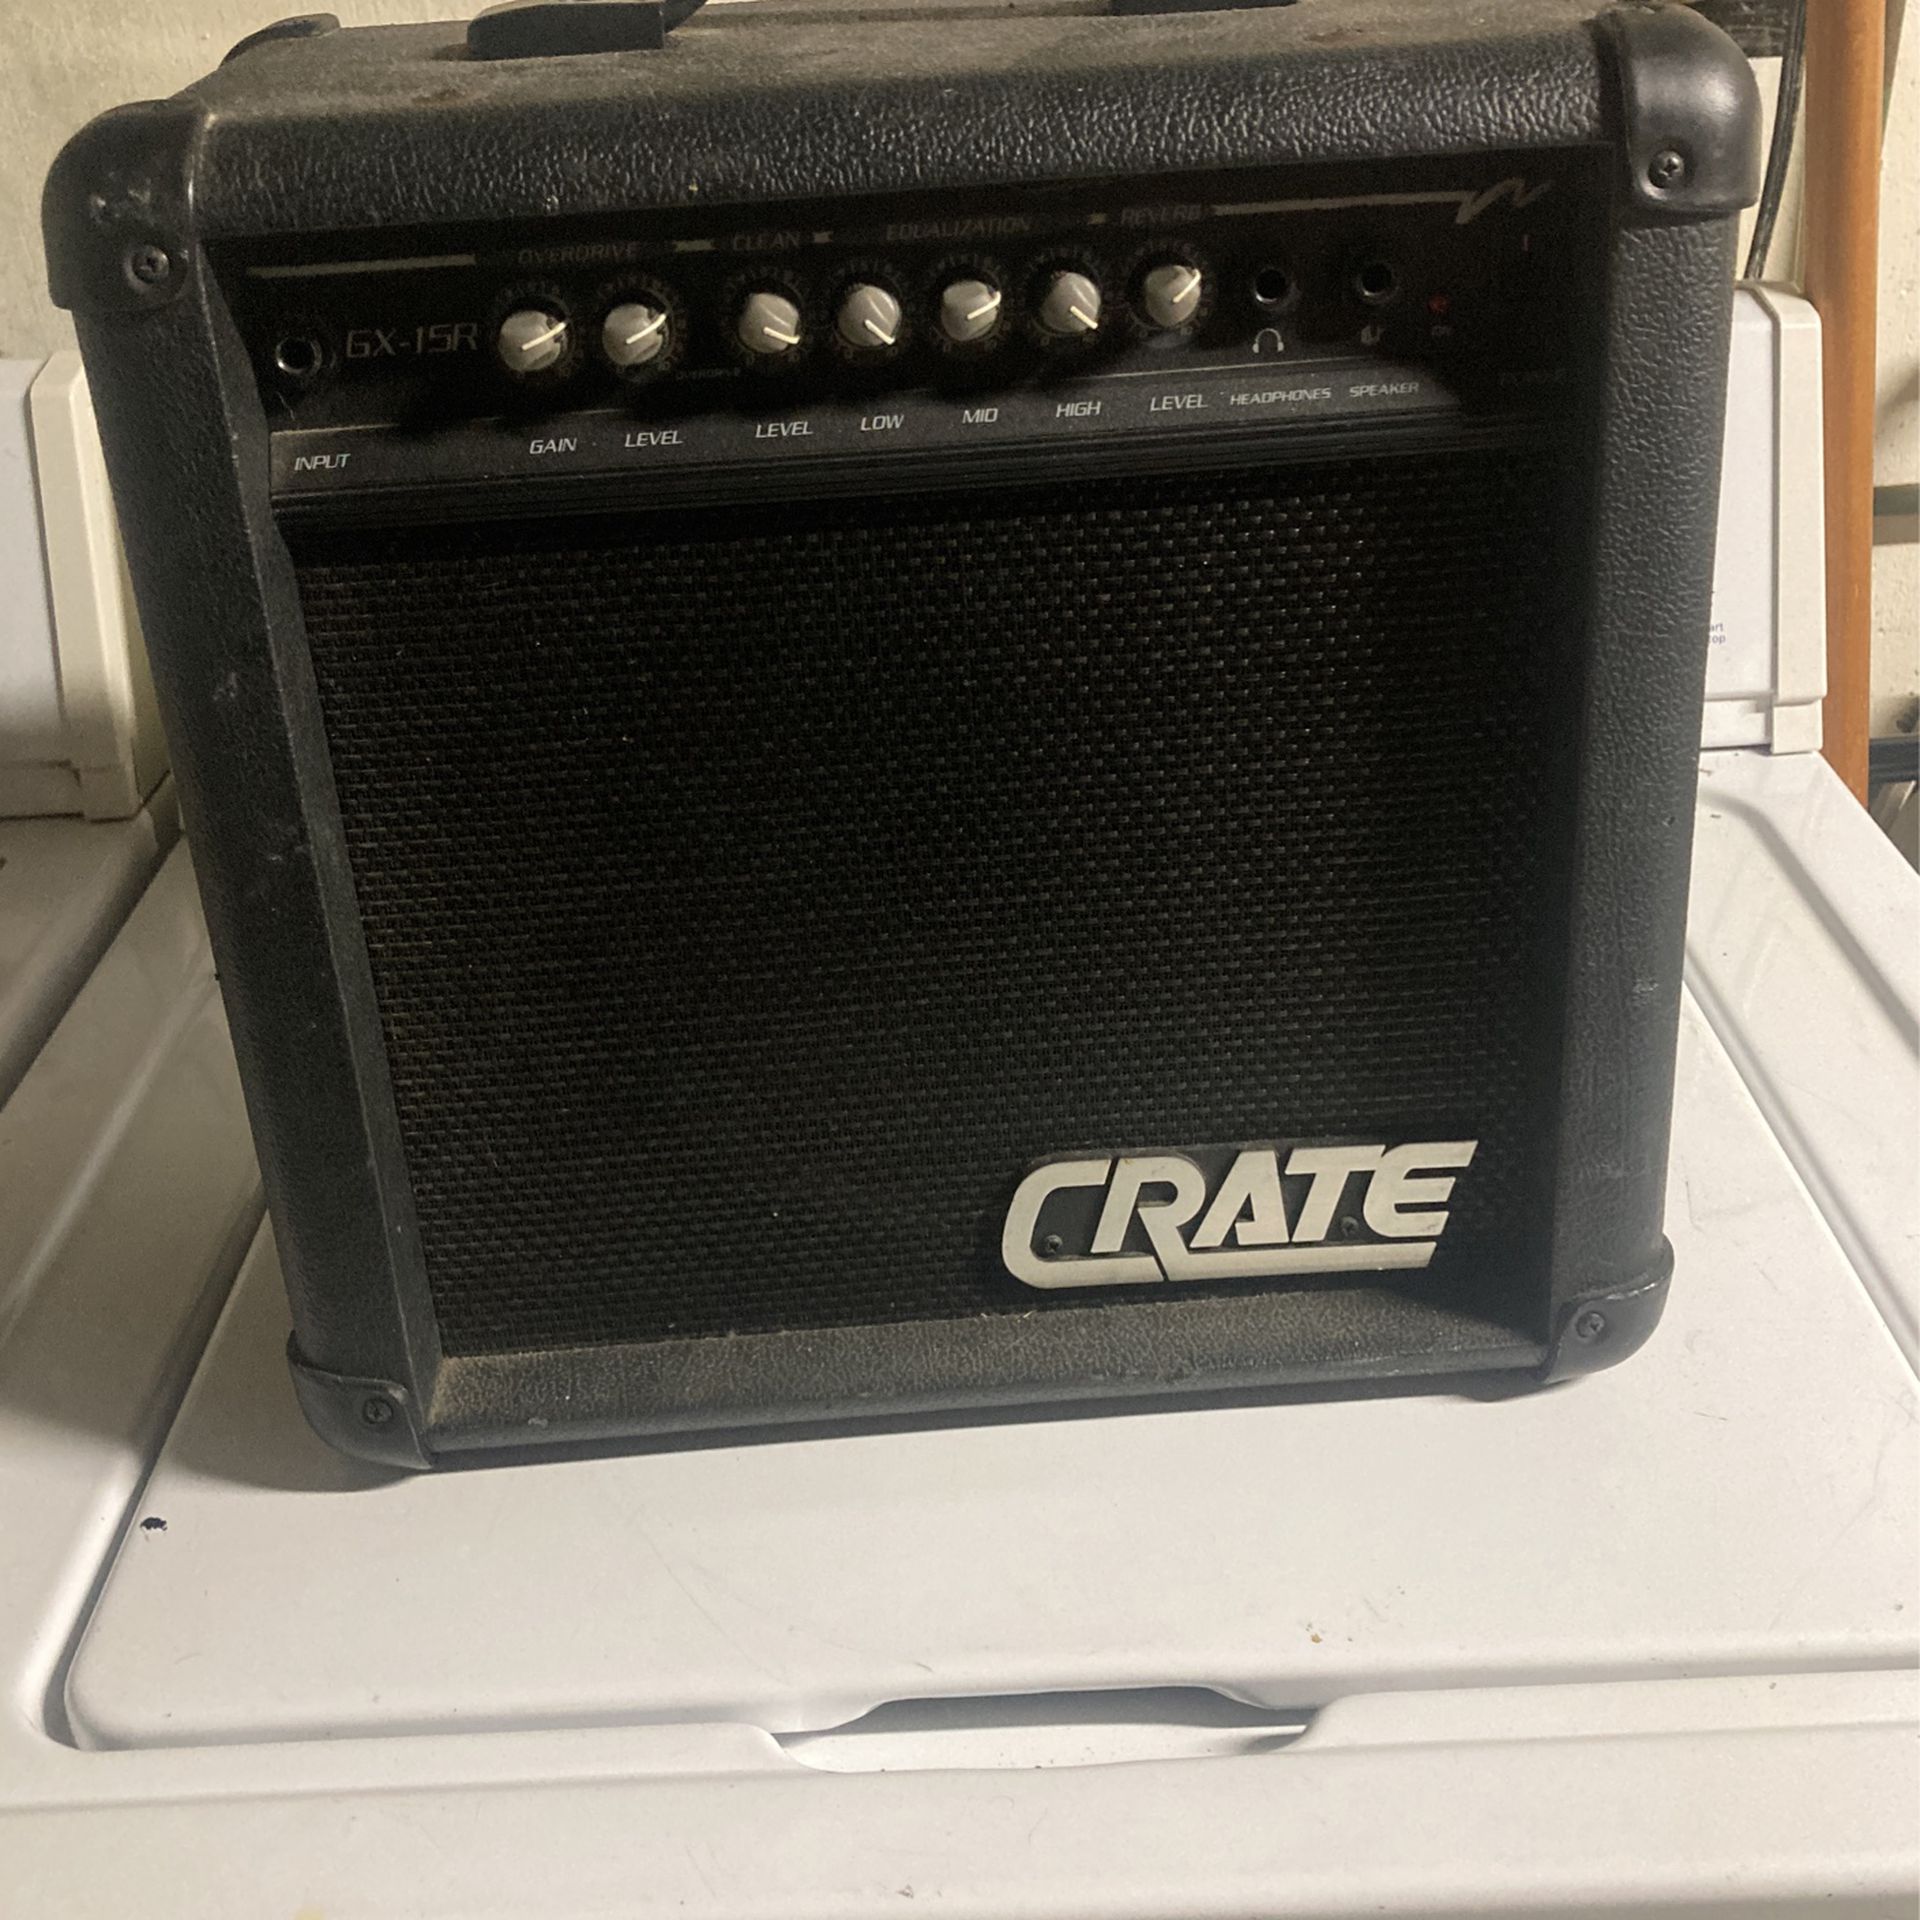 Small amp Works very well just a little dusty $25 